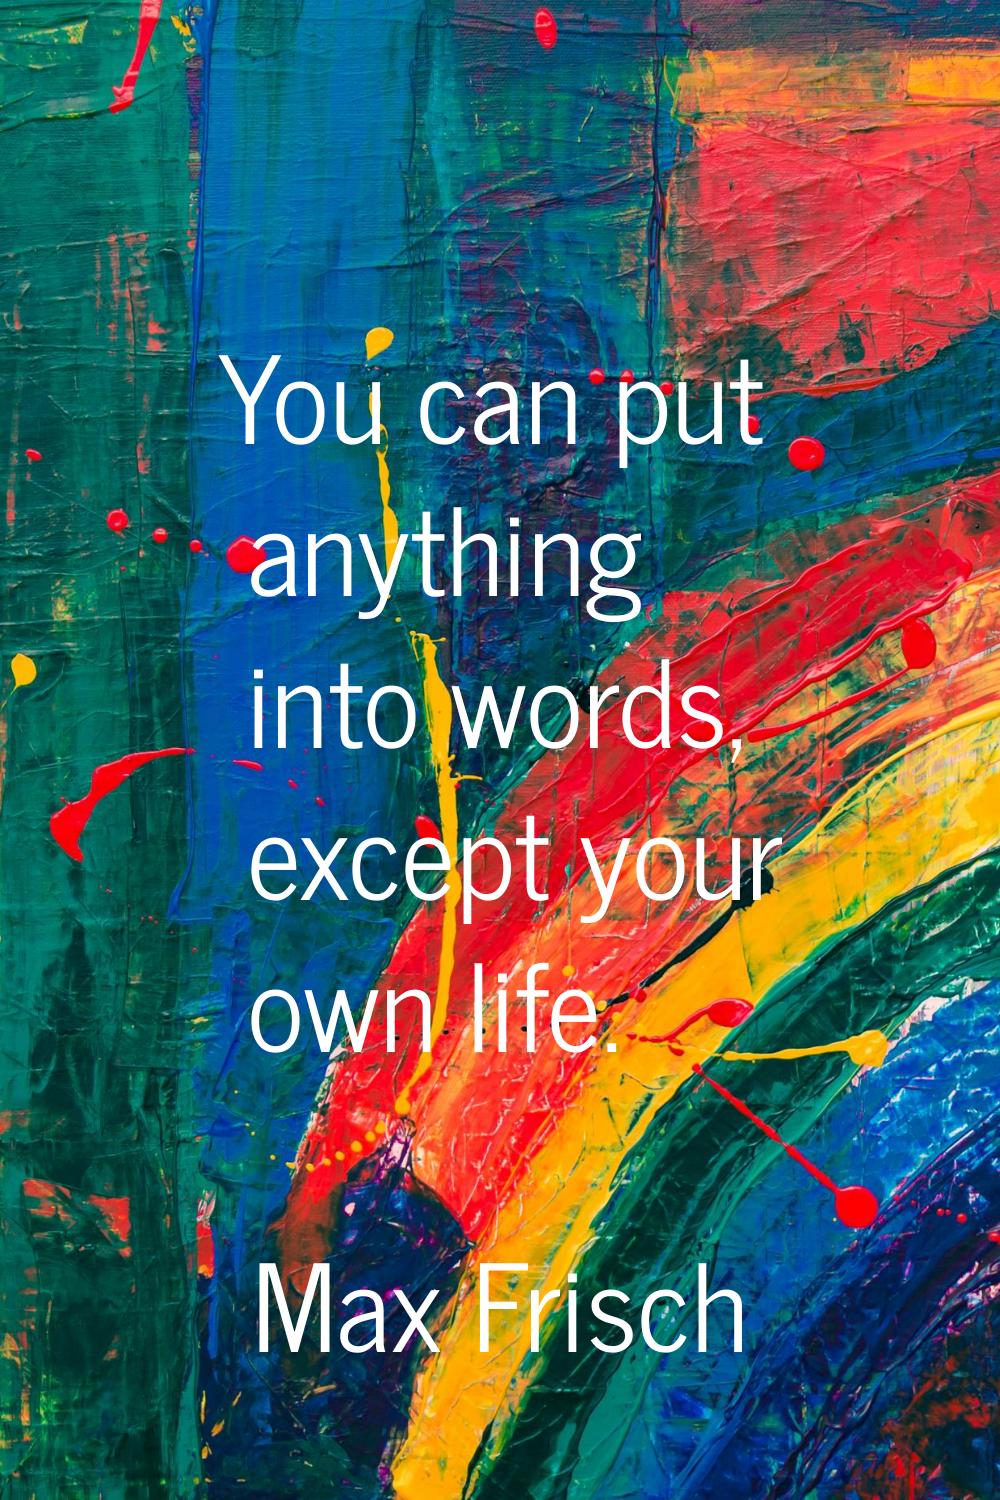 You can put anything into words, except your own life.